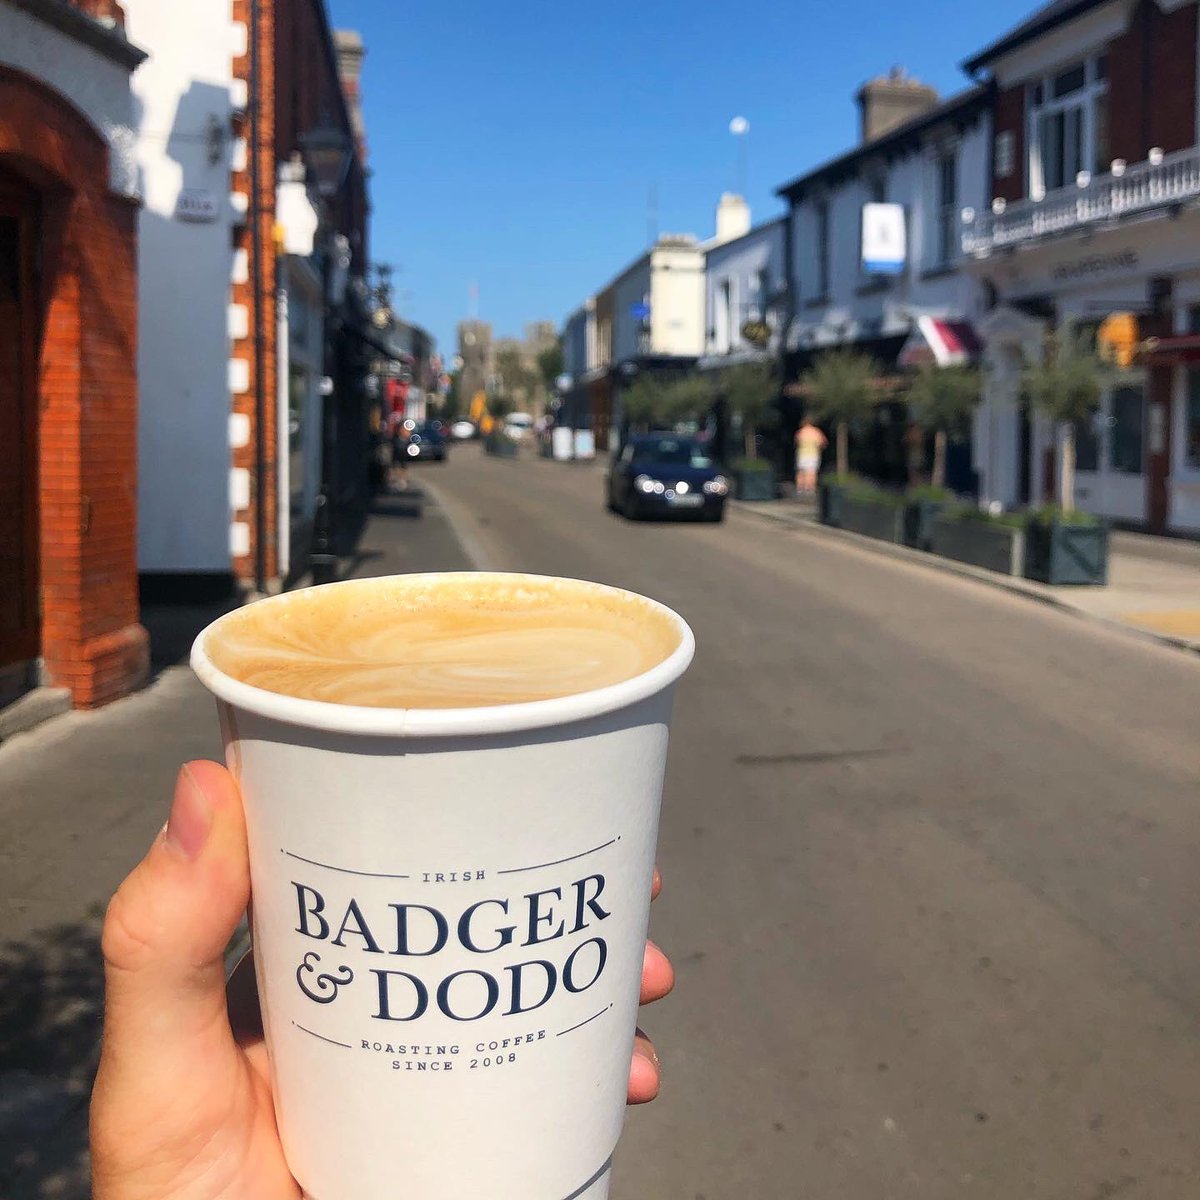 What goes into our coffee? We have three types of milk to choose from: @TheVillageDairy organic milk, @CalifiaFarmsUK oat milk and @Alpro almond milk. In terms of the coffee itself, we use the famous @BadgerAndDodo coffee and brew this with a new @victoriaarduino coffee machine!